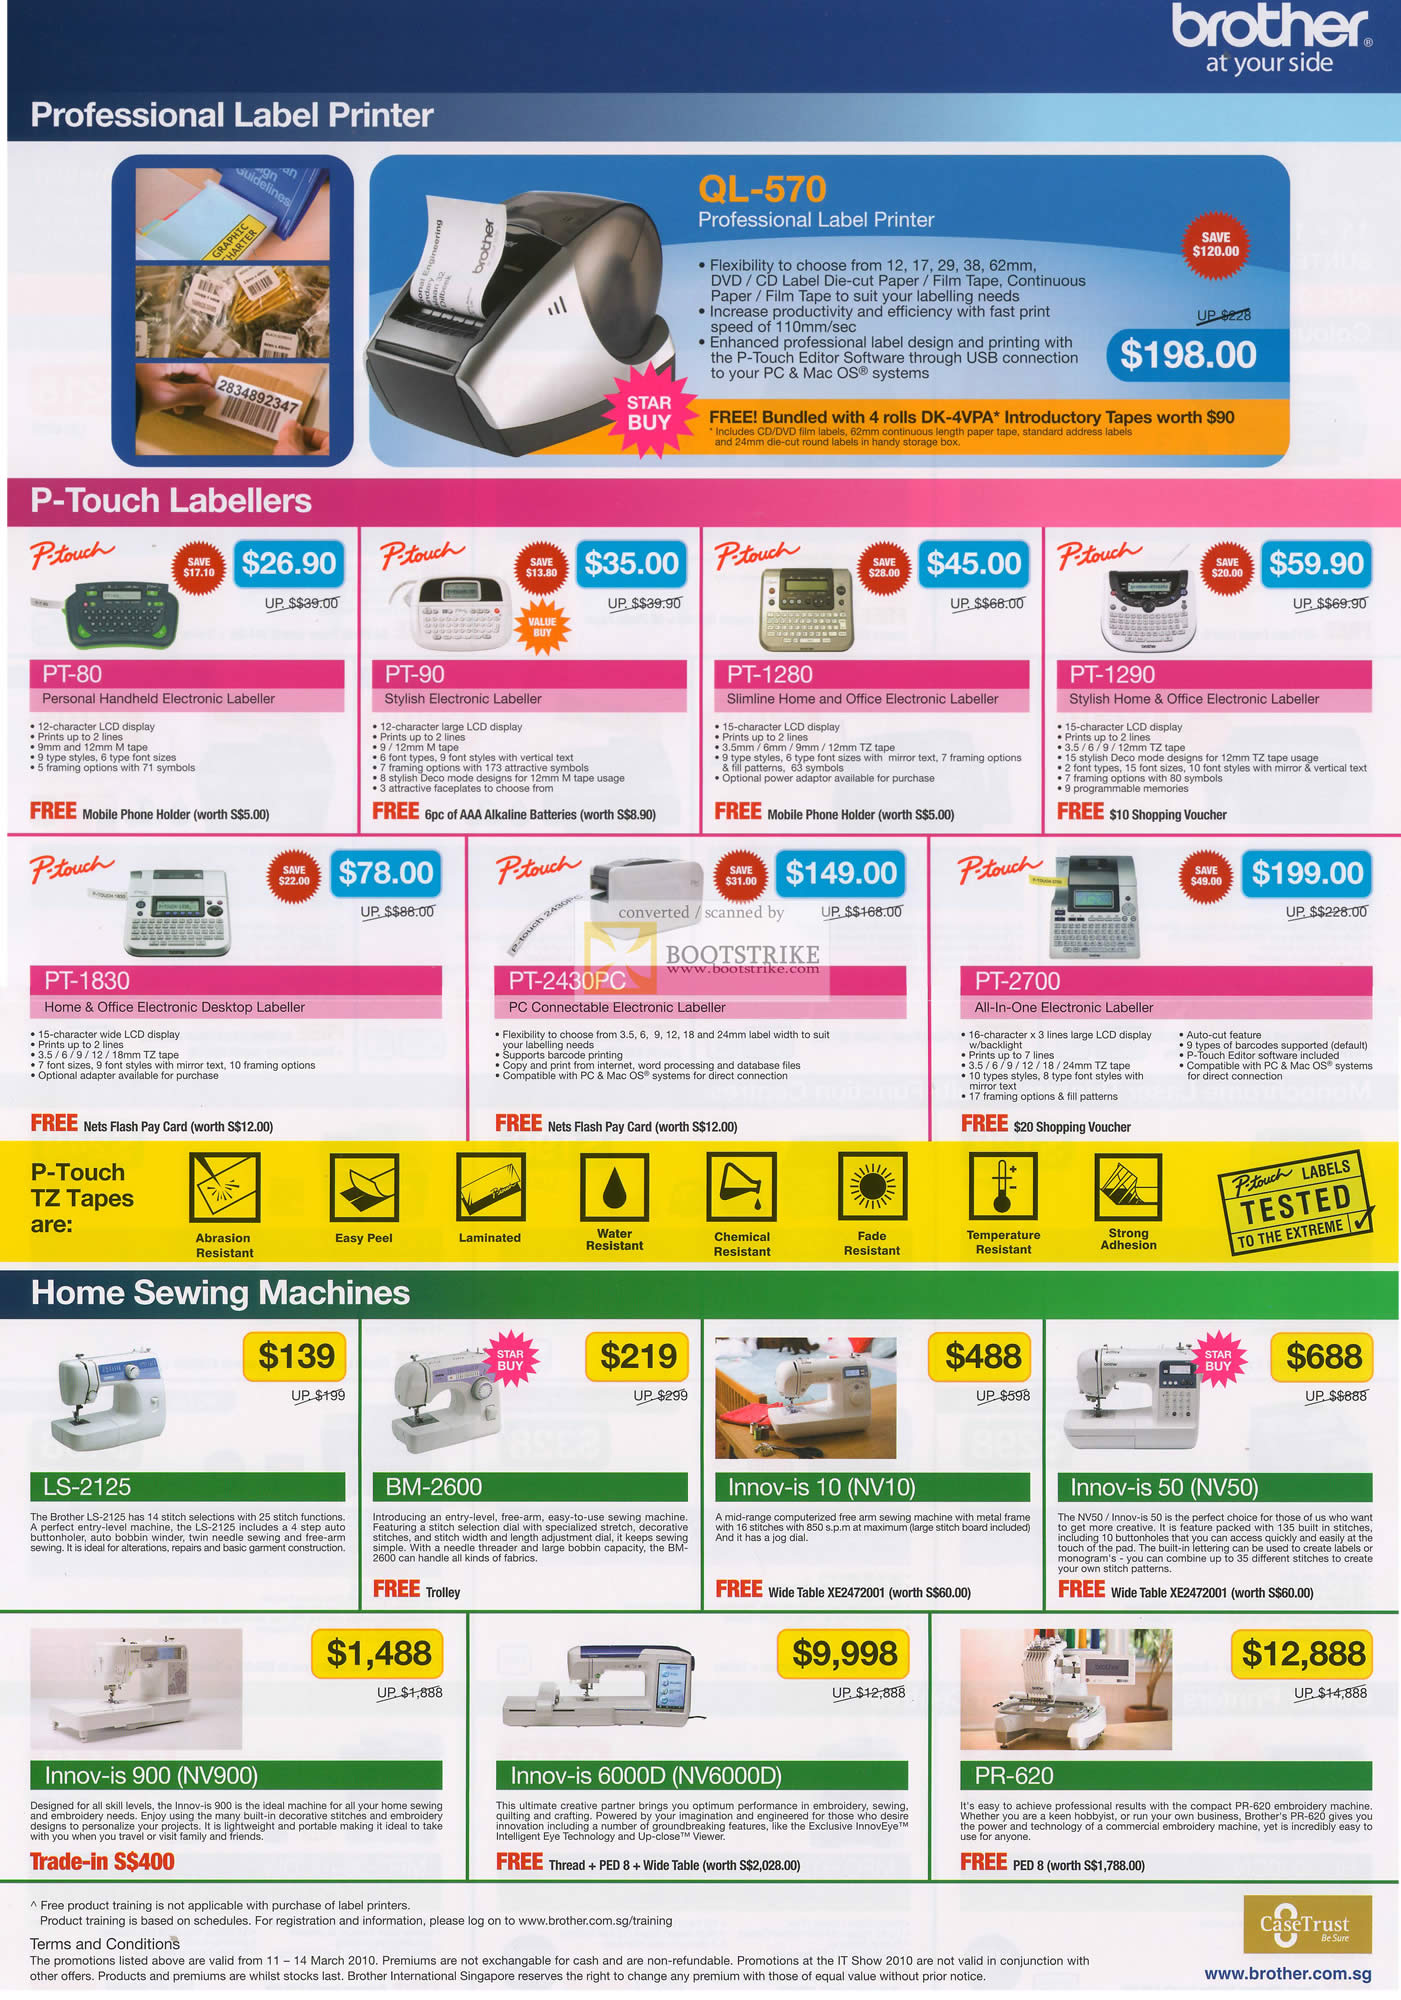 IT Show 2010 price list image brochure of Brother Label Printer P Touch PT 80 90 1280 1290 1830 2430PC 2700 Home Sewing Machines LS 2125 BM 2600 Innov